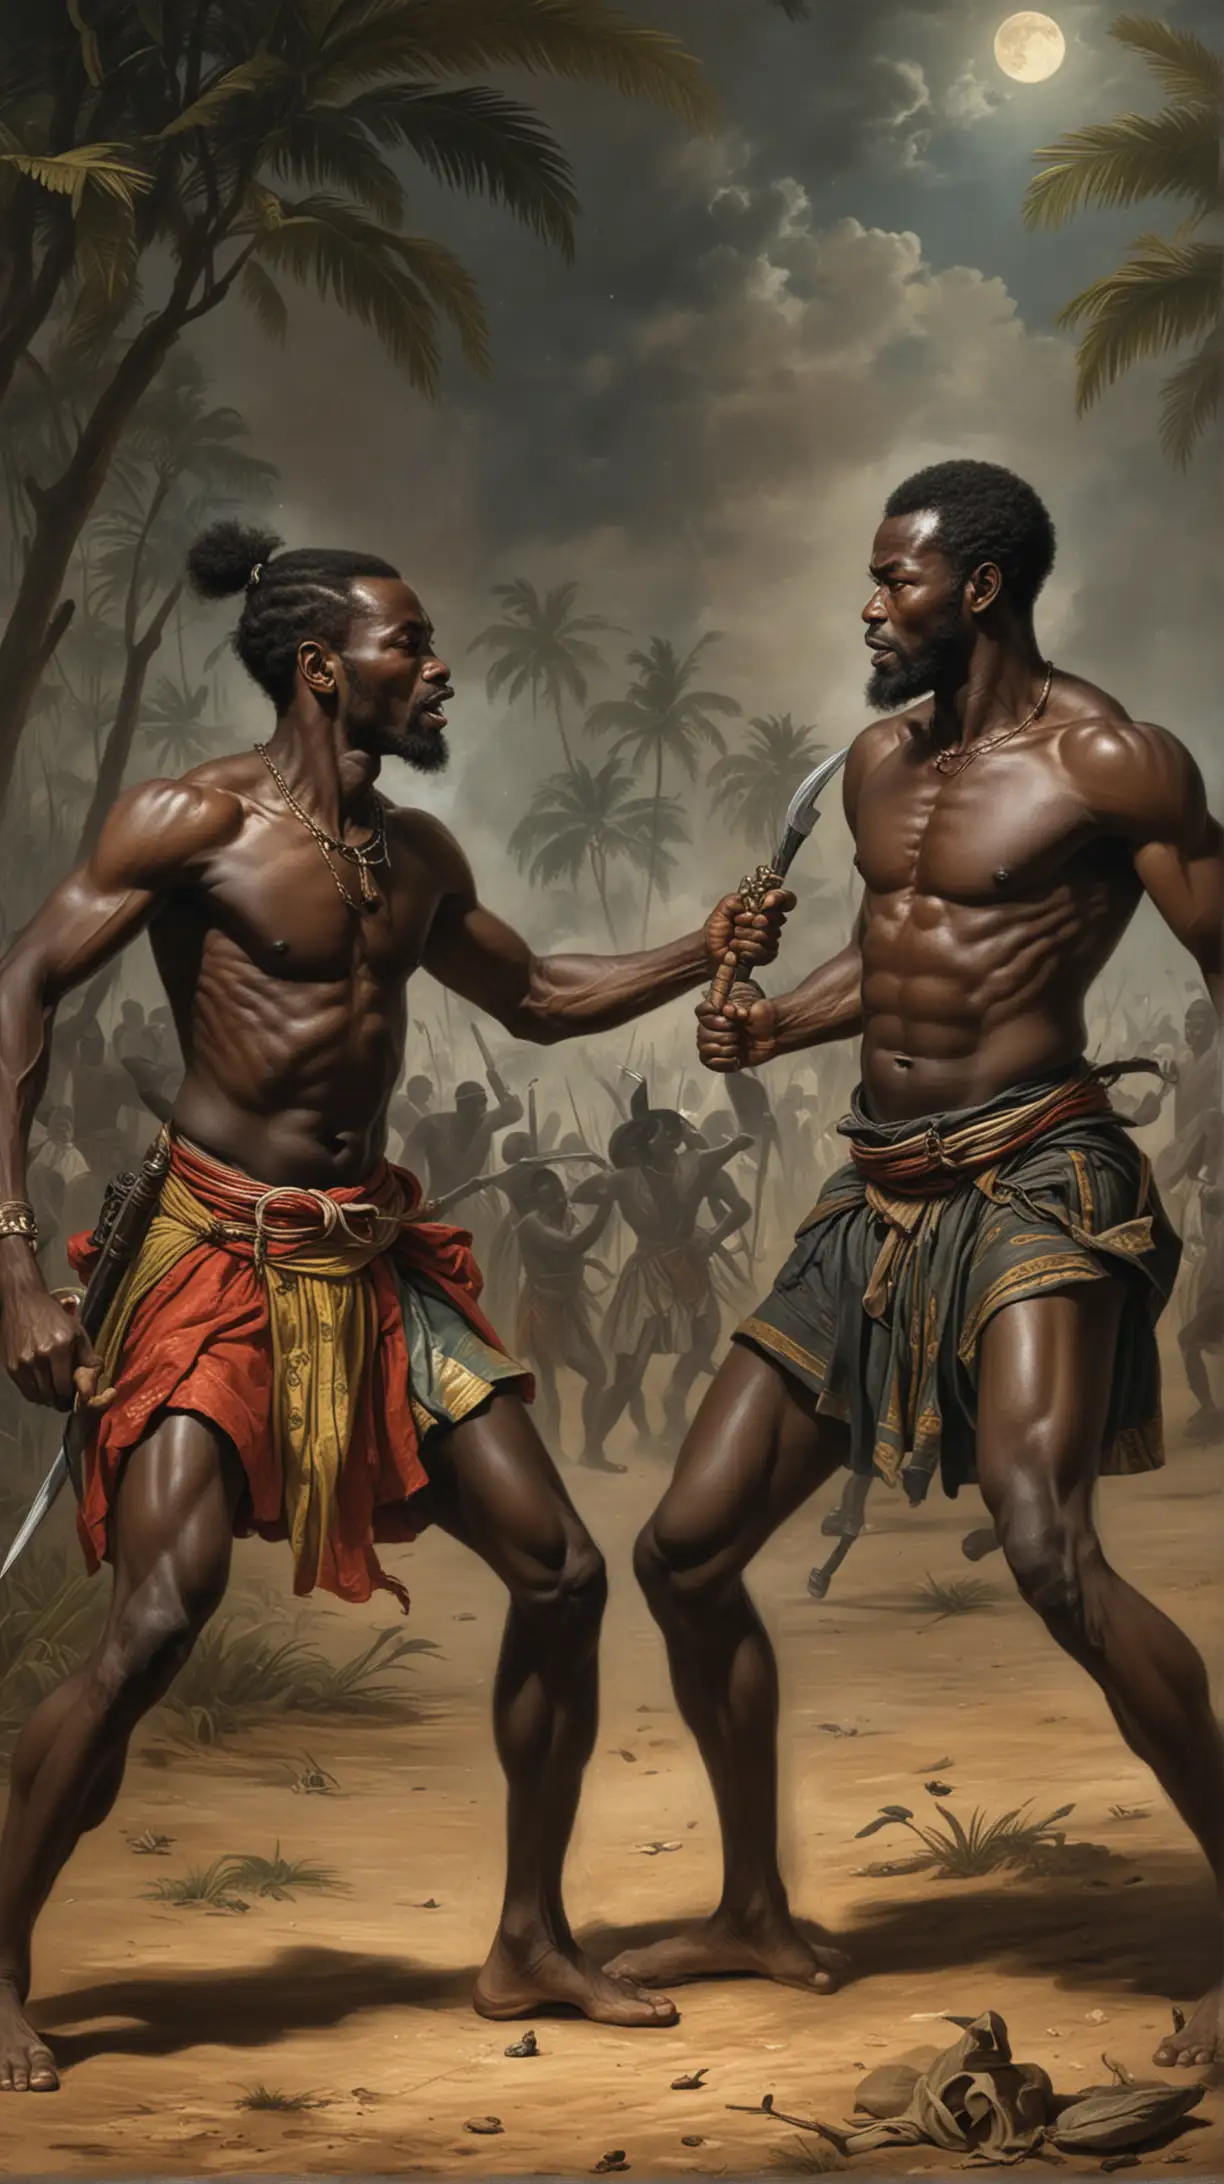 Nighttime Duel Two Strong Black Men Clash in 17th Century Angola